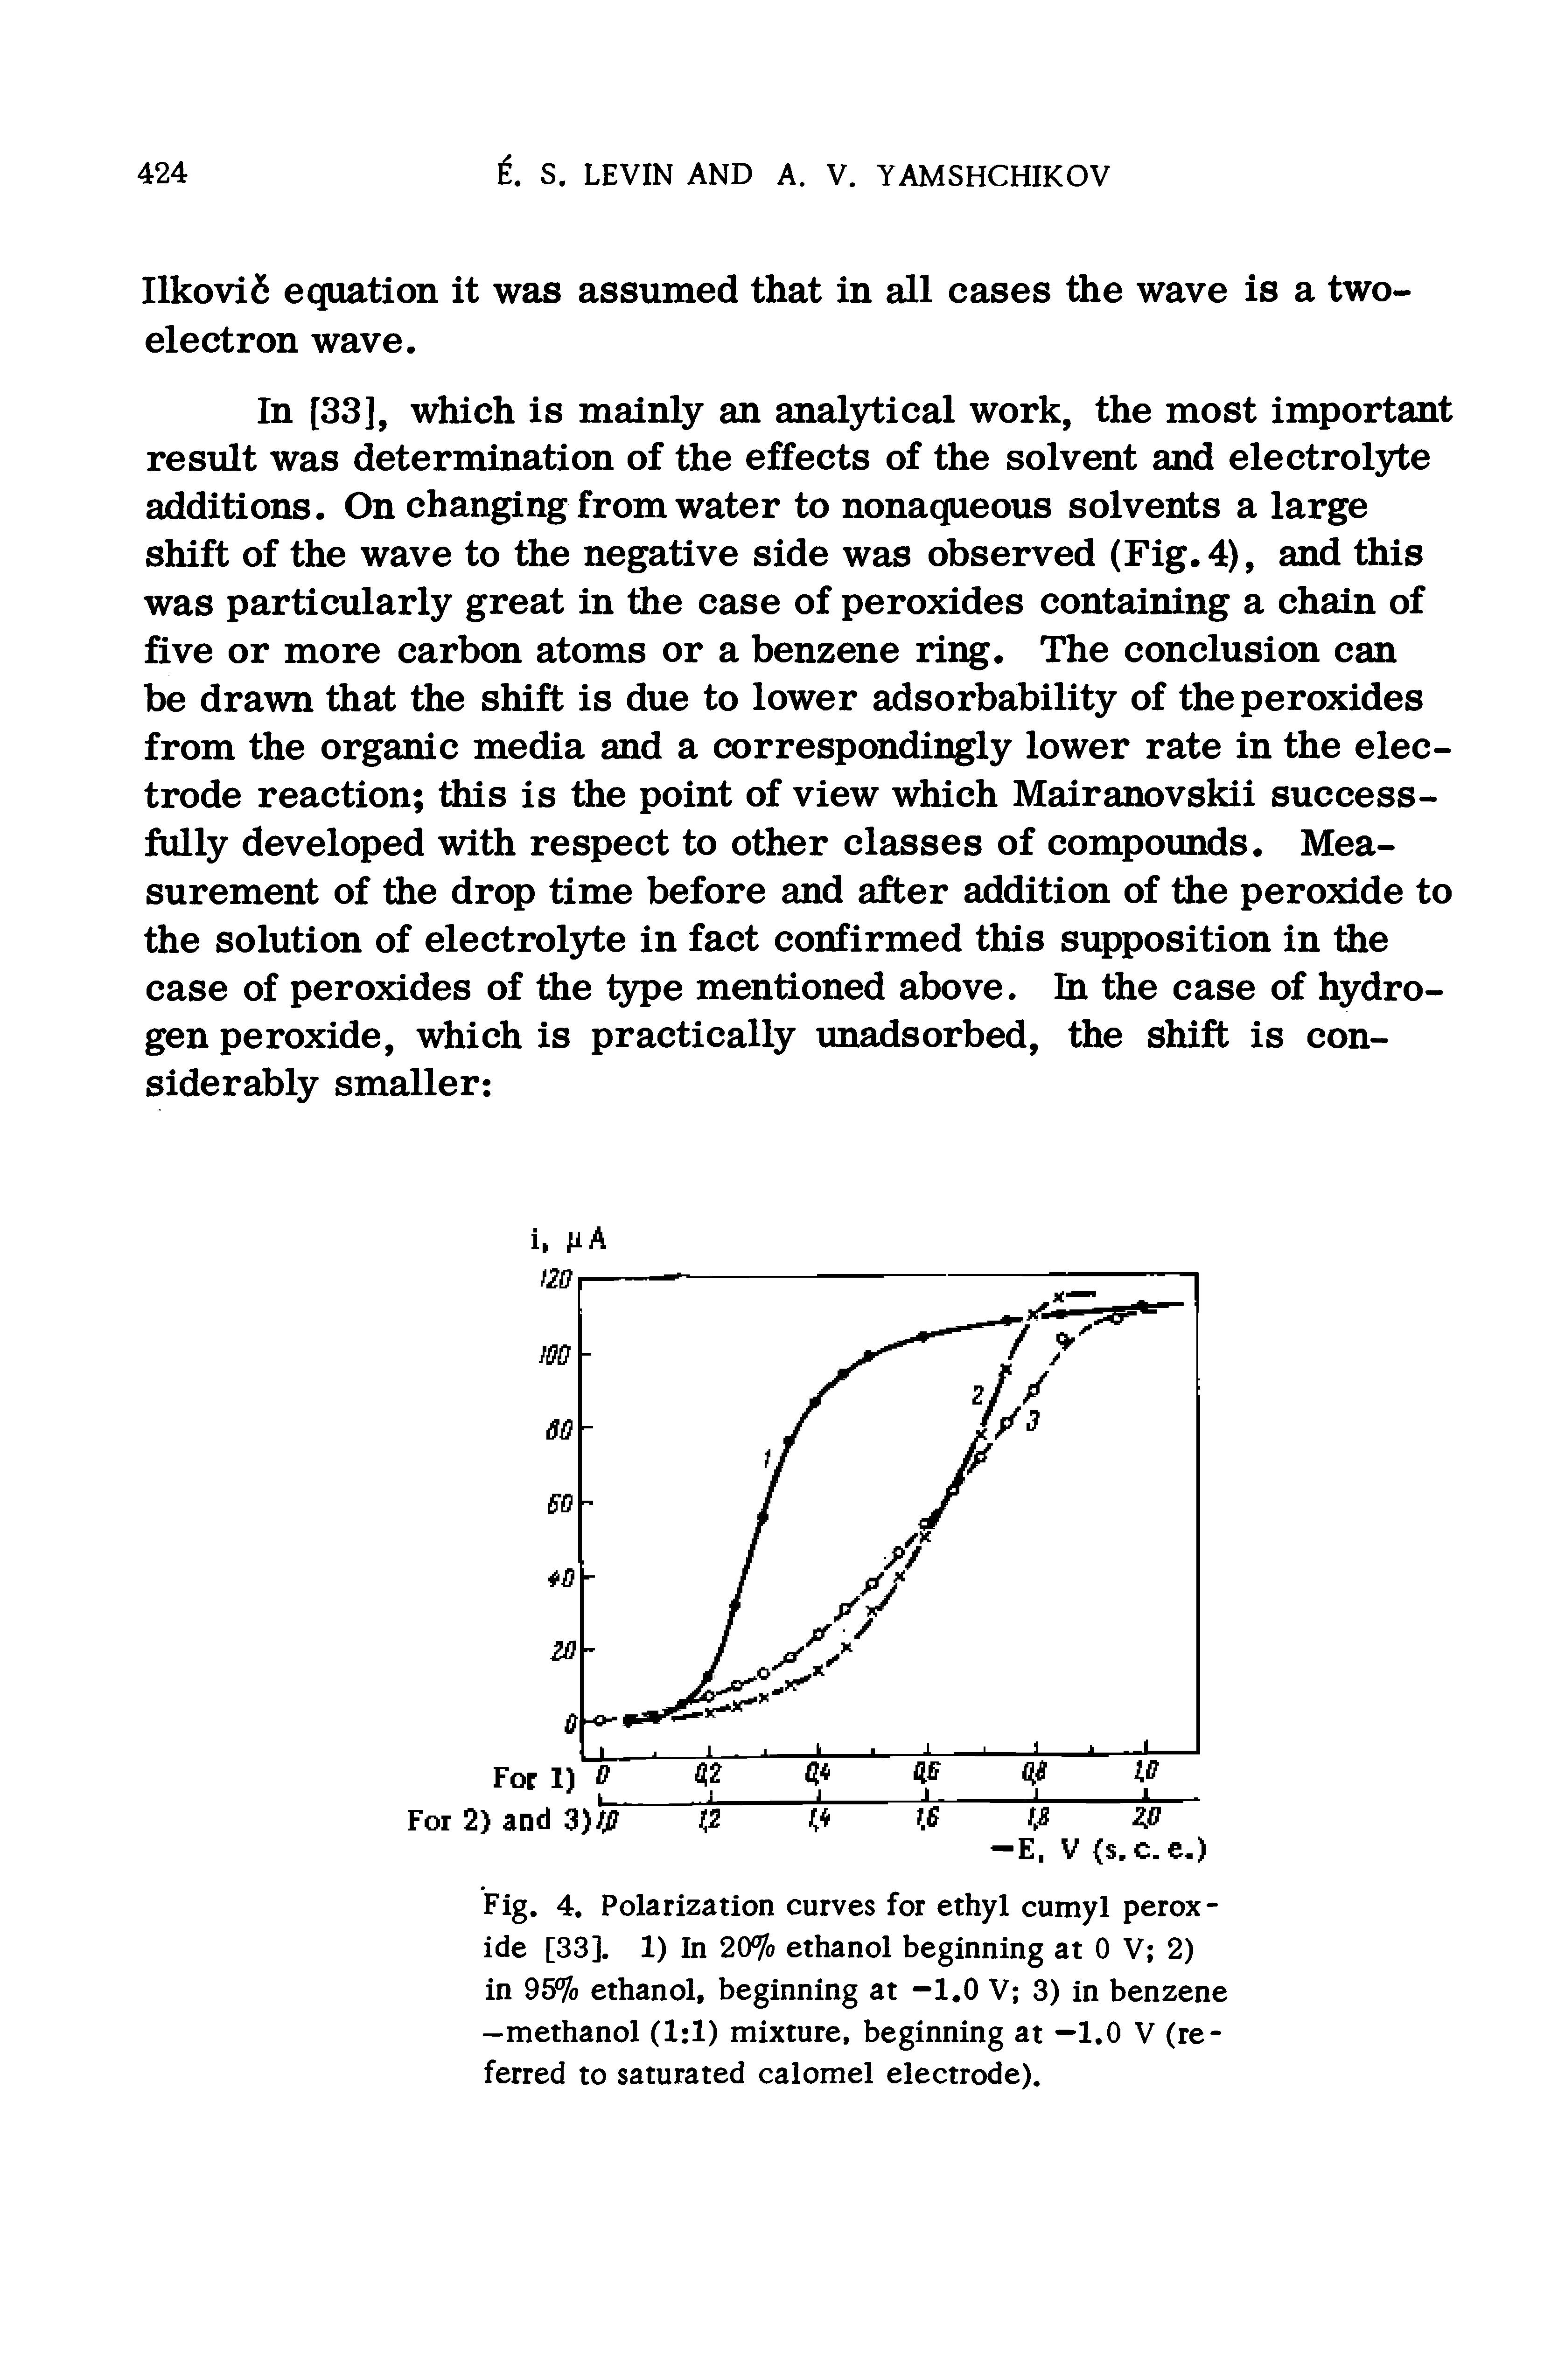 Fig. 4. Polarization curves for ethyl cumyl peroxide [33], 1) In 20% ethanol beginning at 0 V 2) in 95% ethanol, beginning at -1.0 V 3) in benzene -methanol (1 1) mixture, beginning at —1.0 V (referred to saturated calomel electrode).